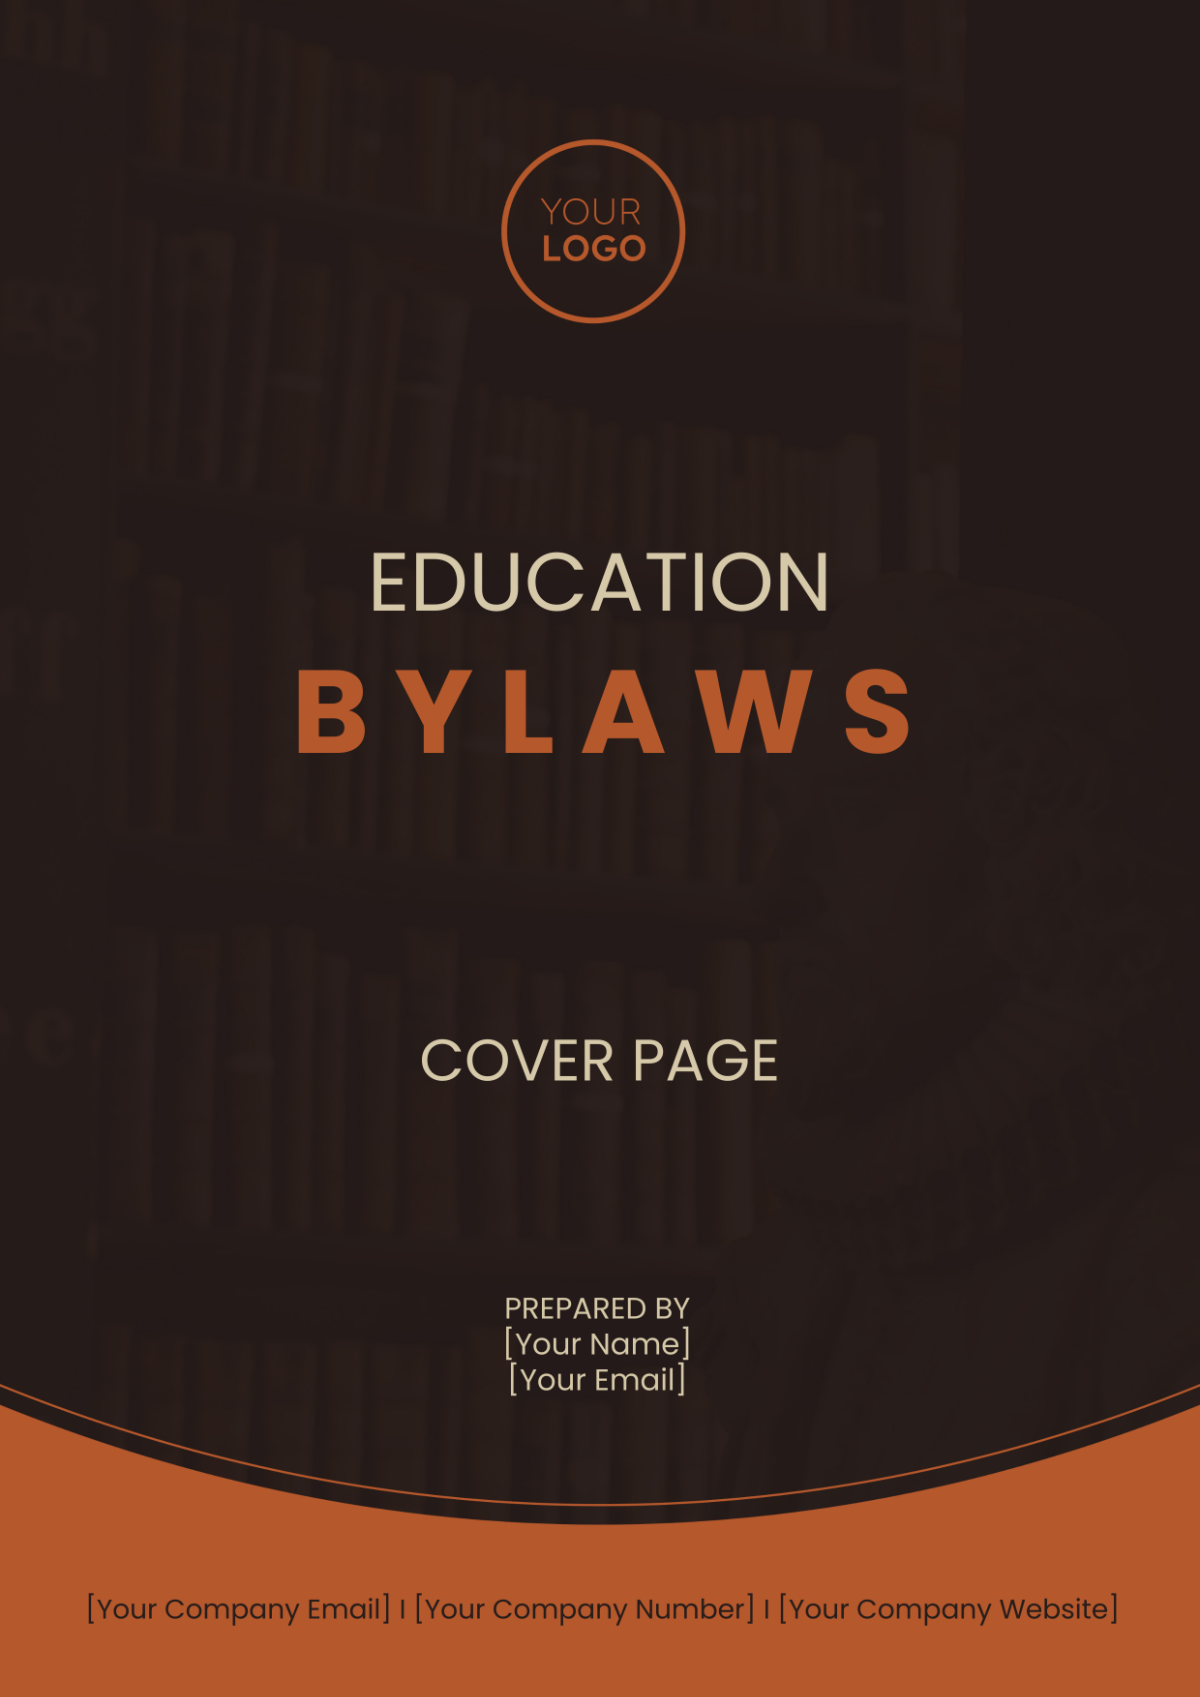 Education Bylaws Cover Page